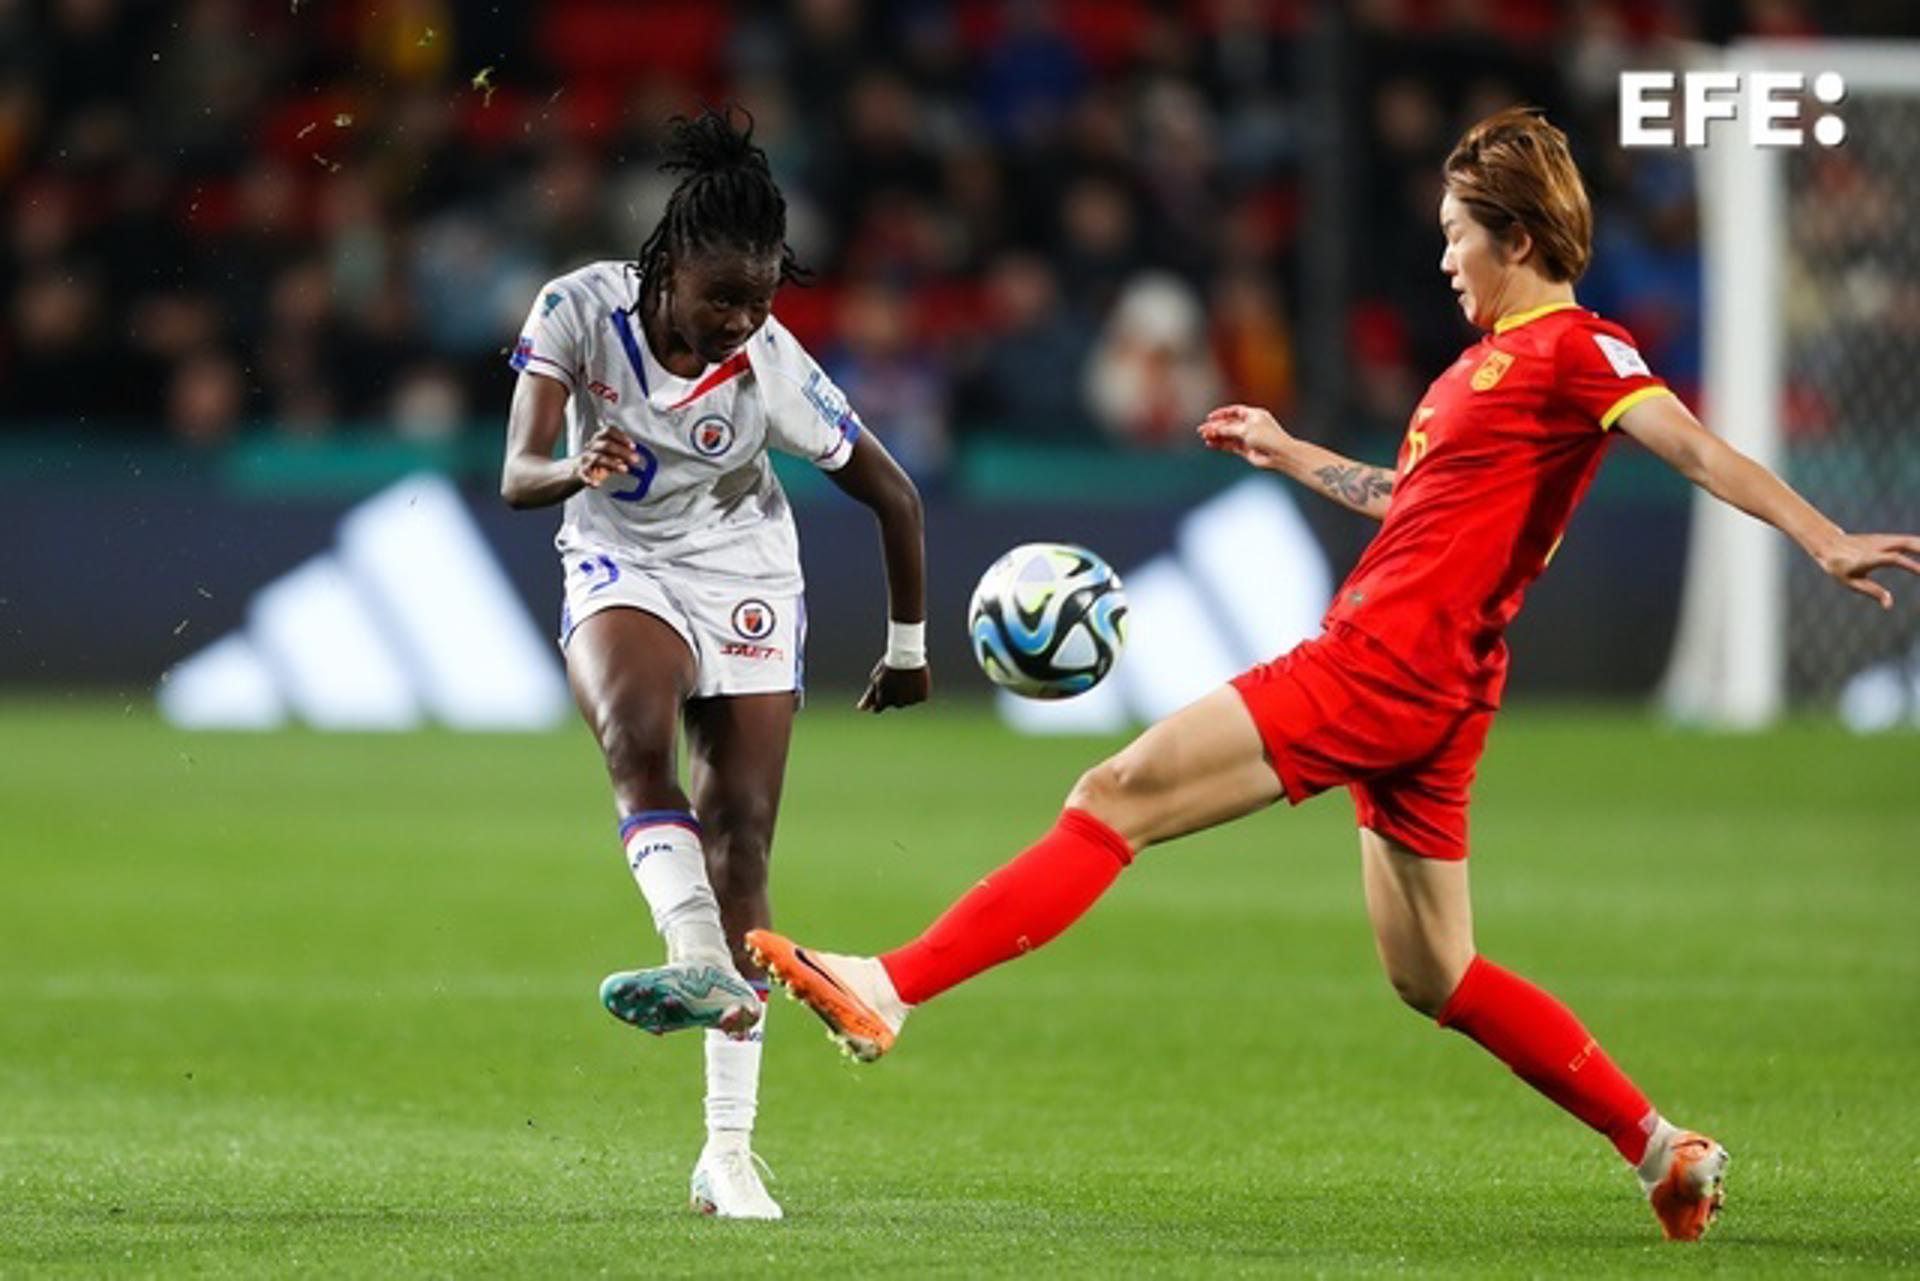 Haiti's Jennyfer Limage (L) takes a shot on goal against China during the FIFA Women's World Cup Group D match in Adelaide, Australia. EFE/EPA/MATT TURNER AUSTRALIA AND NEW ZEALAND OUT EDITORIAL USE ONLY
